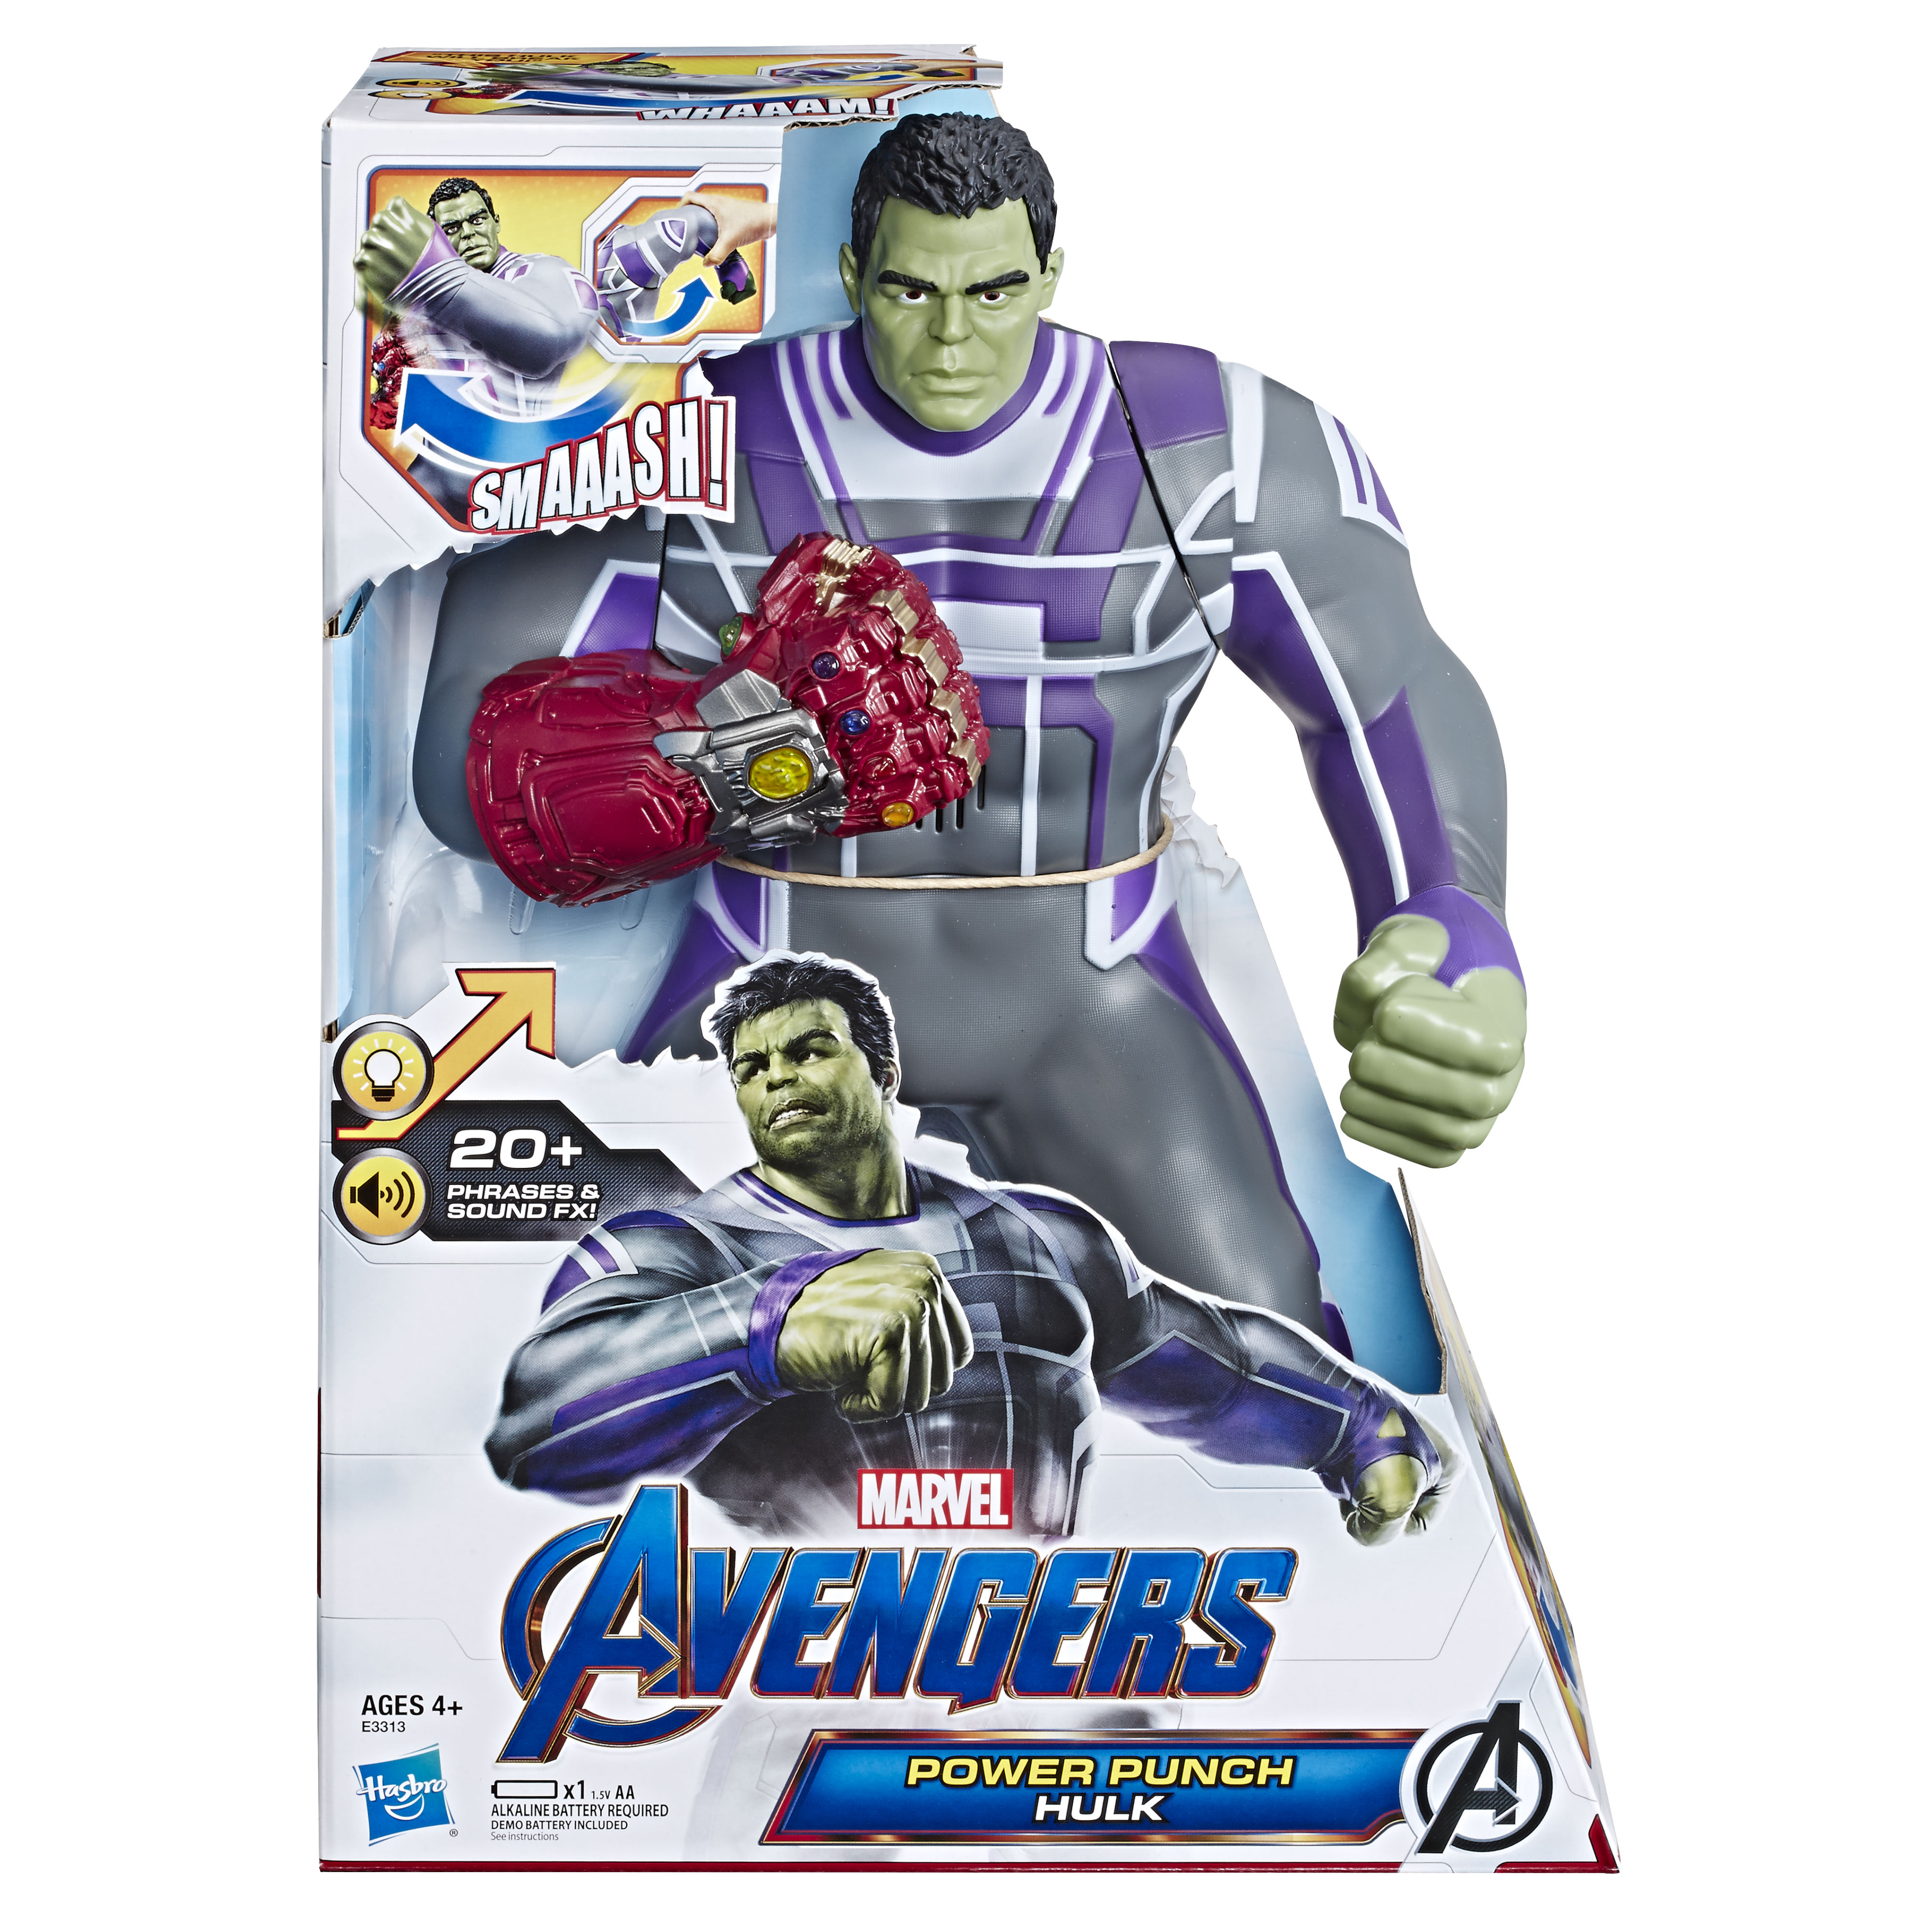 14-inch Power Punch Hulk in-package